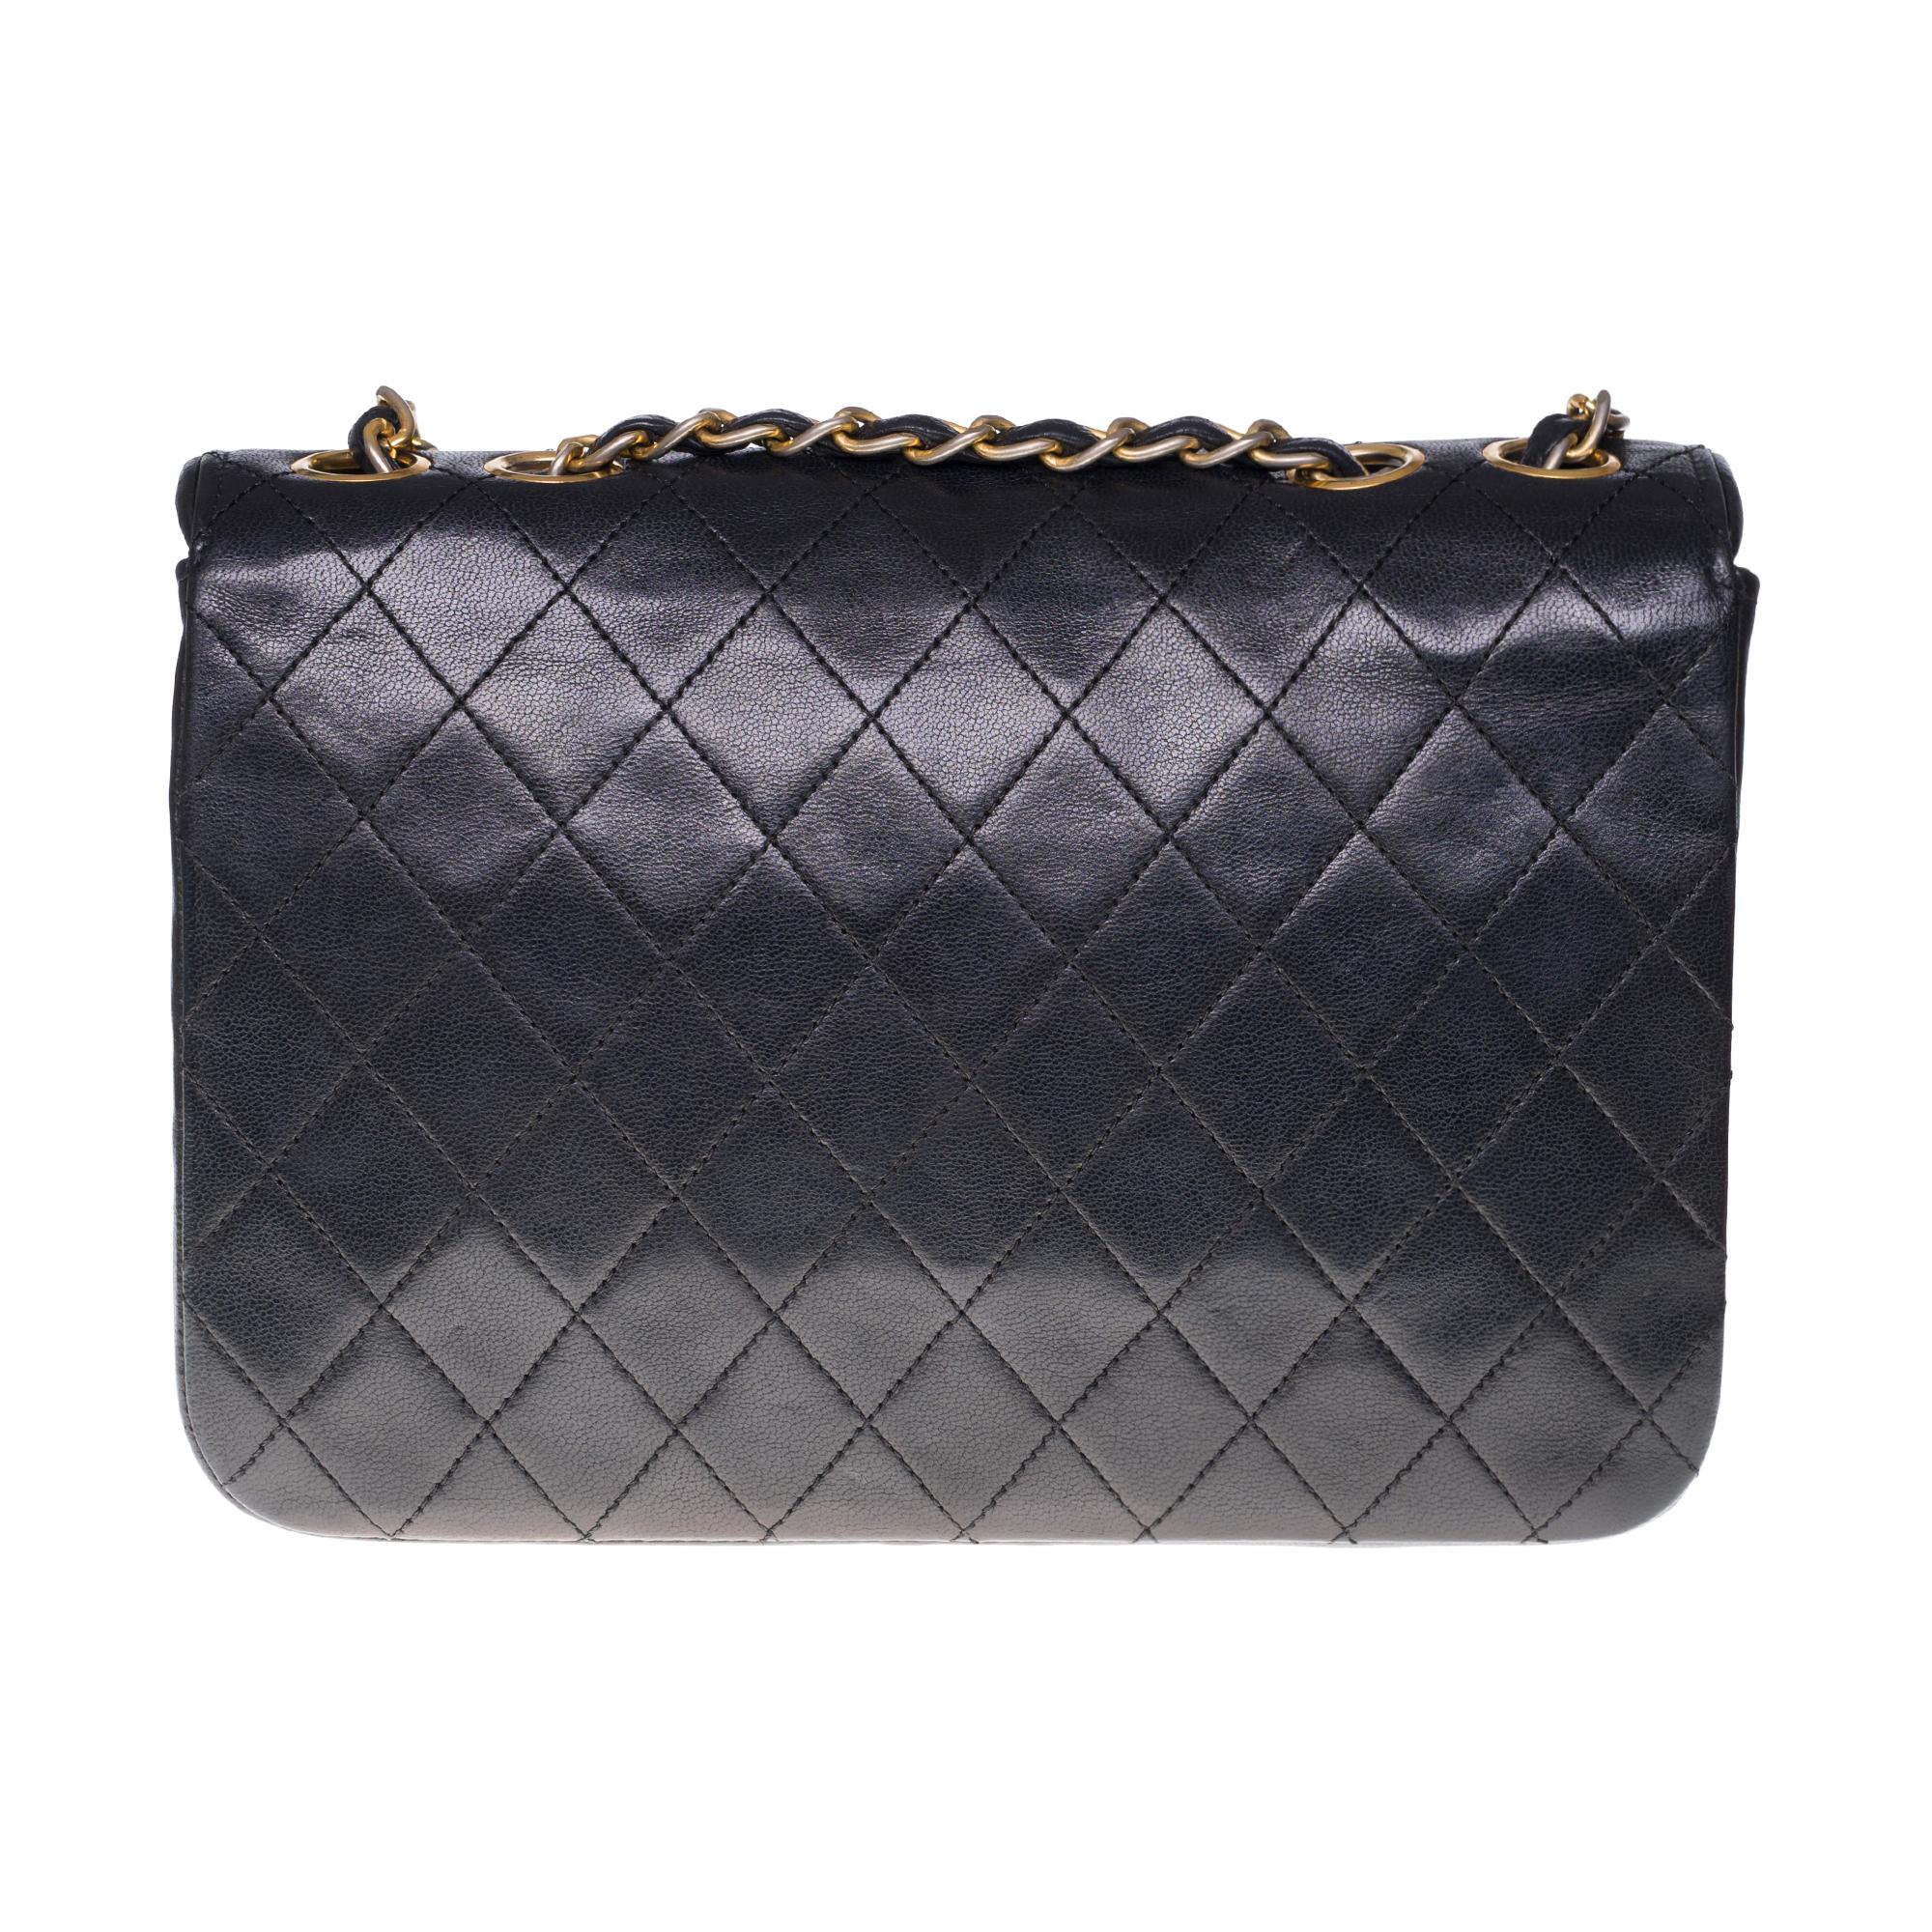 Lovely Chanel Classic Bag 23cm with flap in black quilted lambskin leather, white leather hardware, gold metal hardware, gold metal chain interwoven with black leather.
Flap closure, gold-tone CC symbol.
Lining in black leather, 1 patch pocket, 1